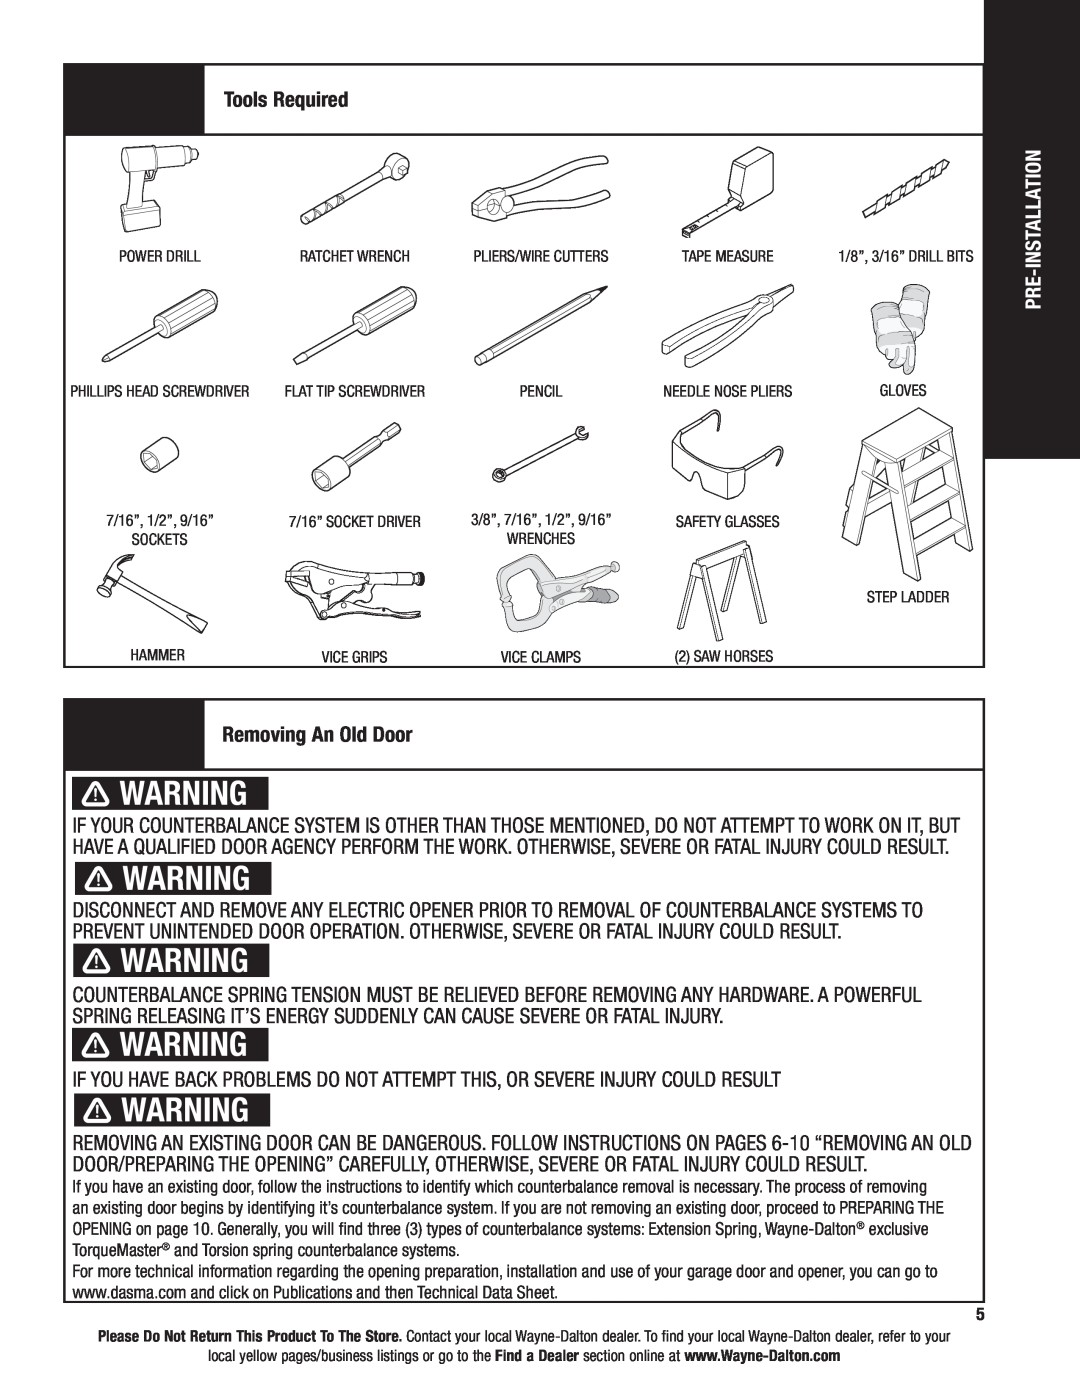 Wayne-Dalton AND 9600, 9400 installation instructions Tools Required 